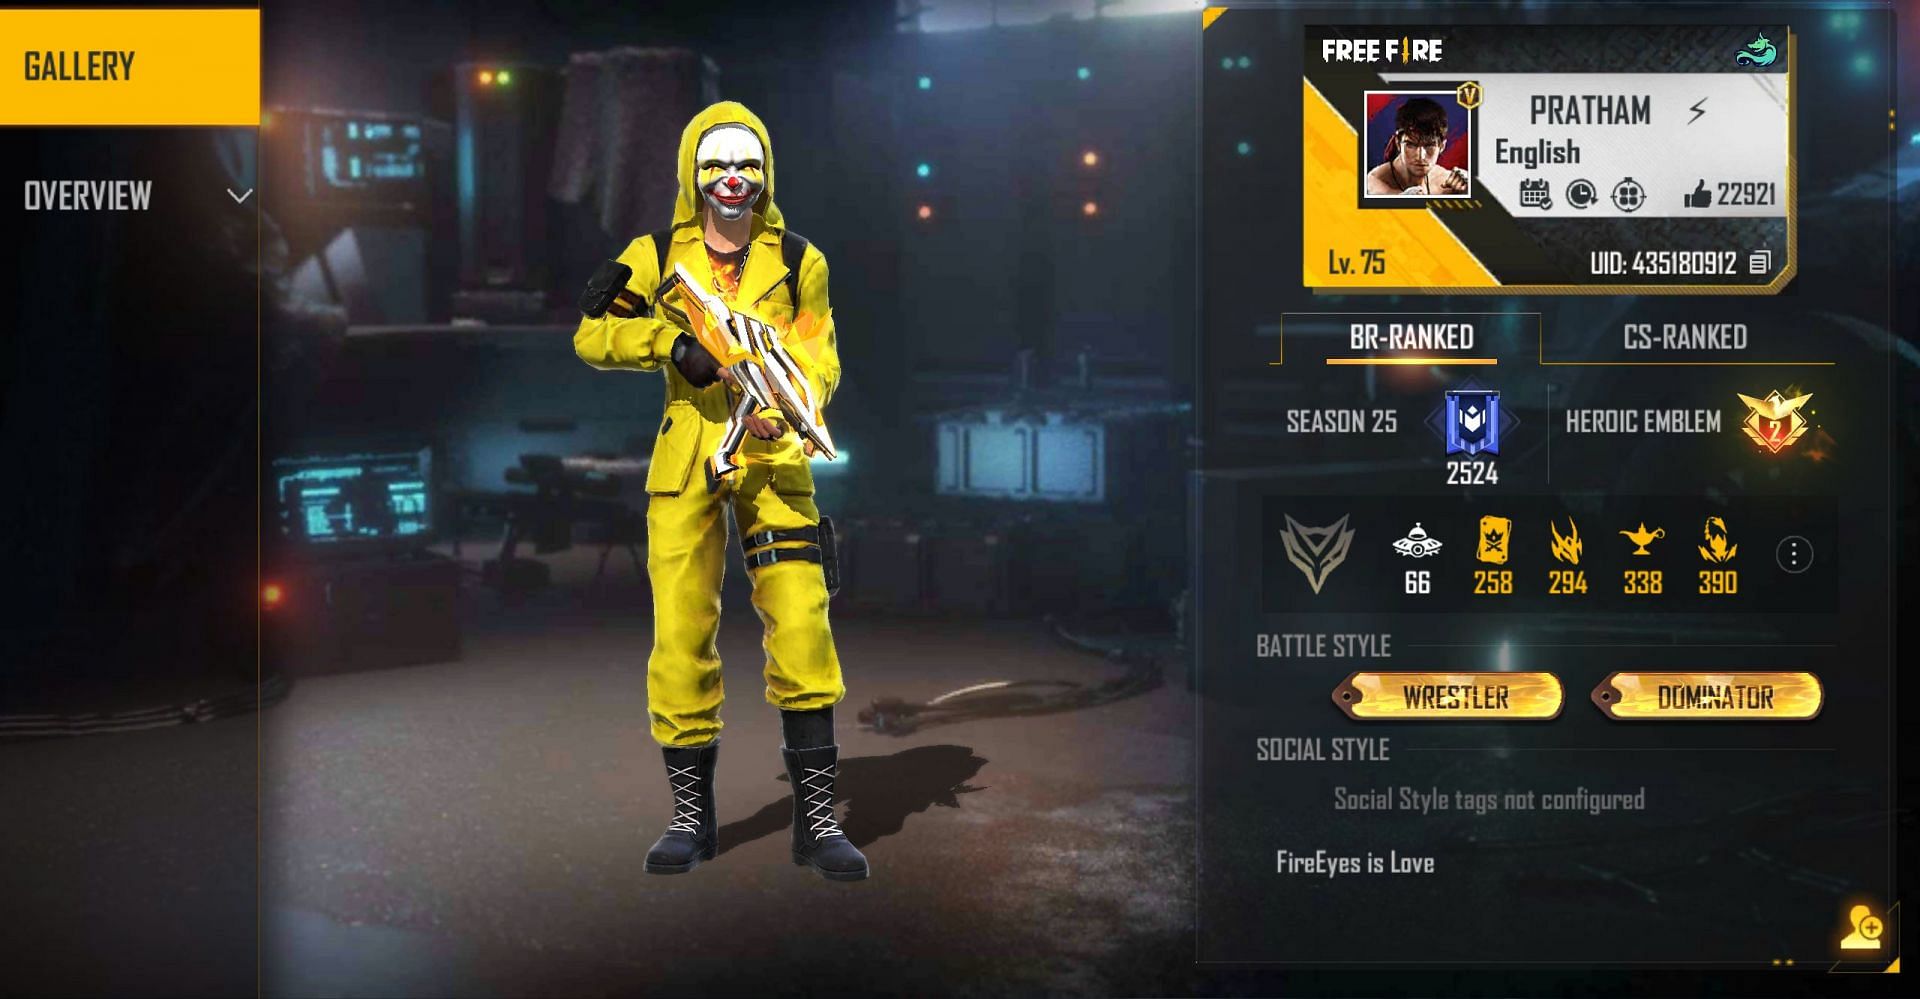 FireEyes Gaming has the V Badge in Free Fire (Image via Garena)